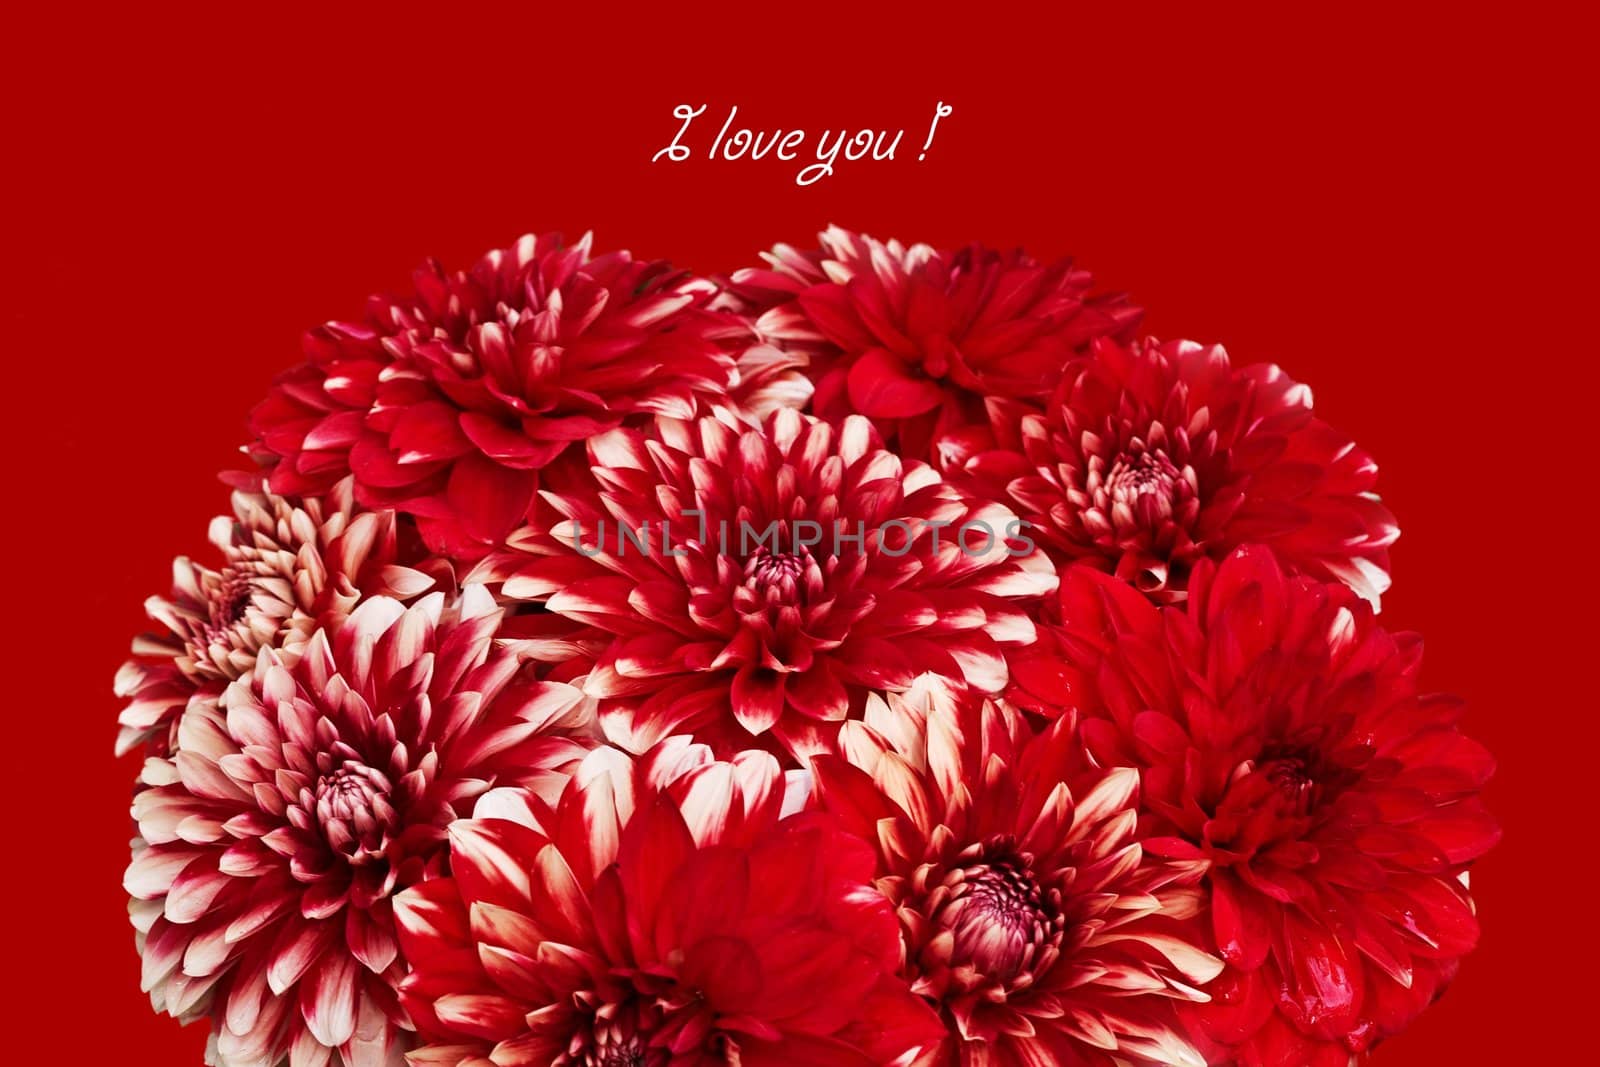 bunch of red flowers, dahlia, happy holiday! congratulations!